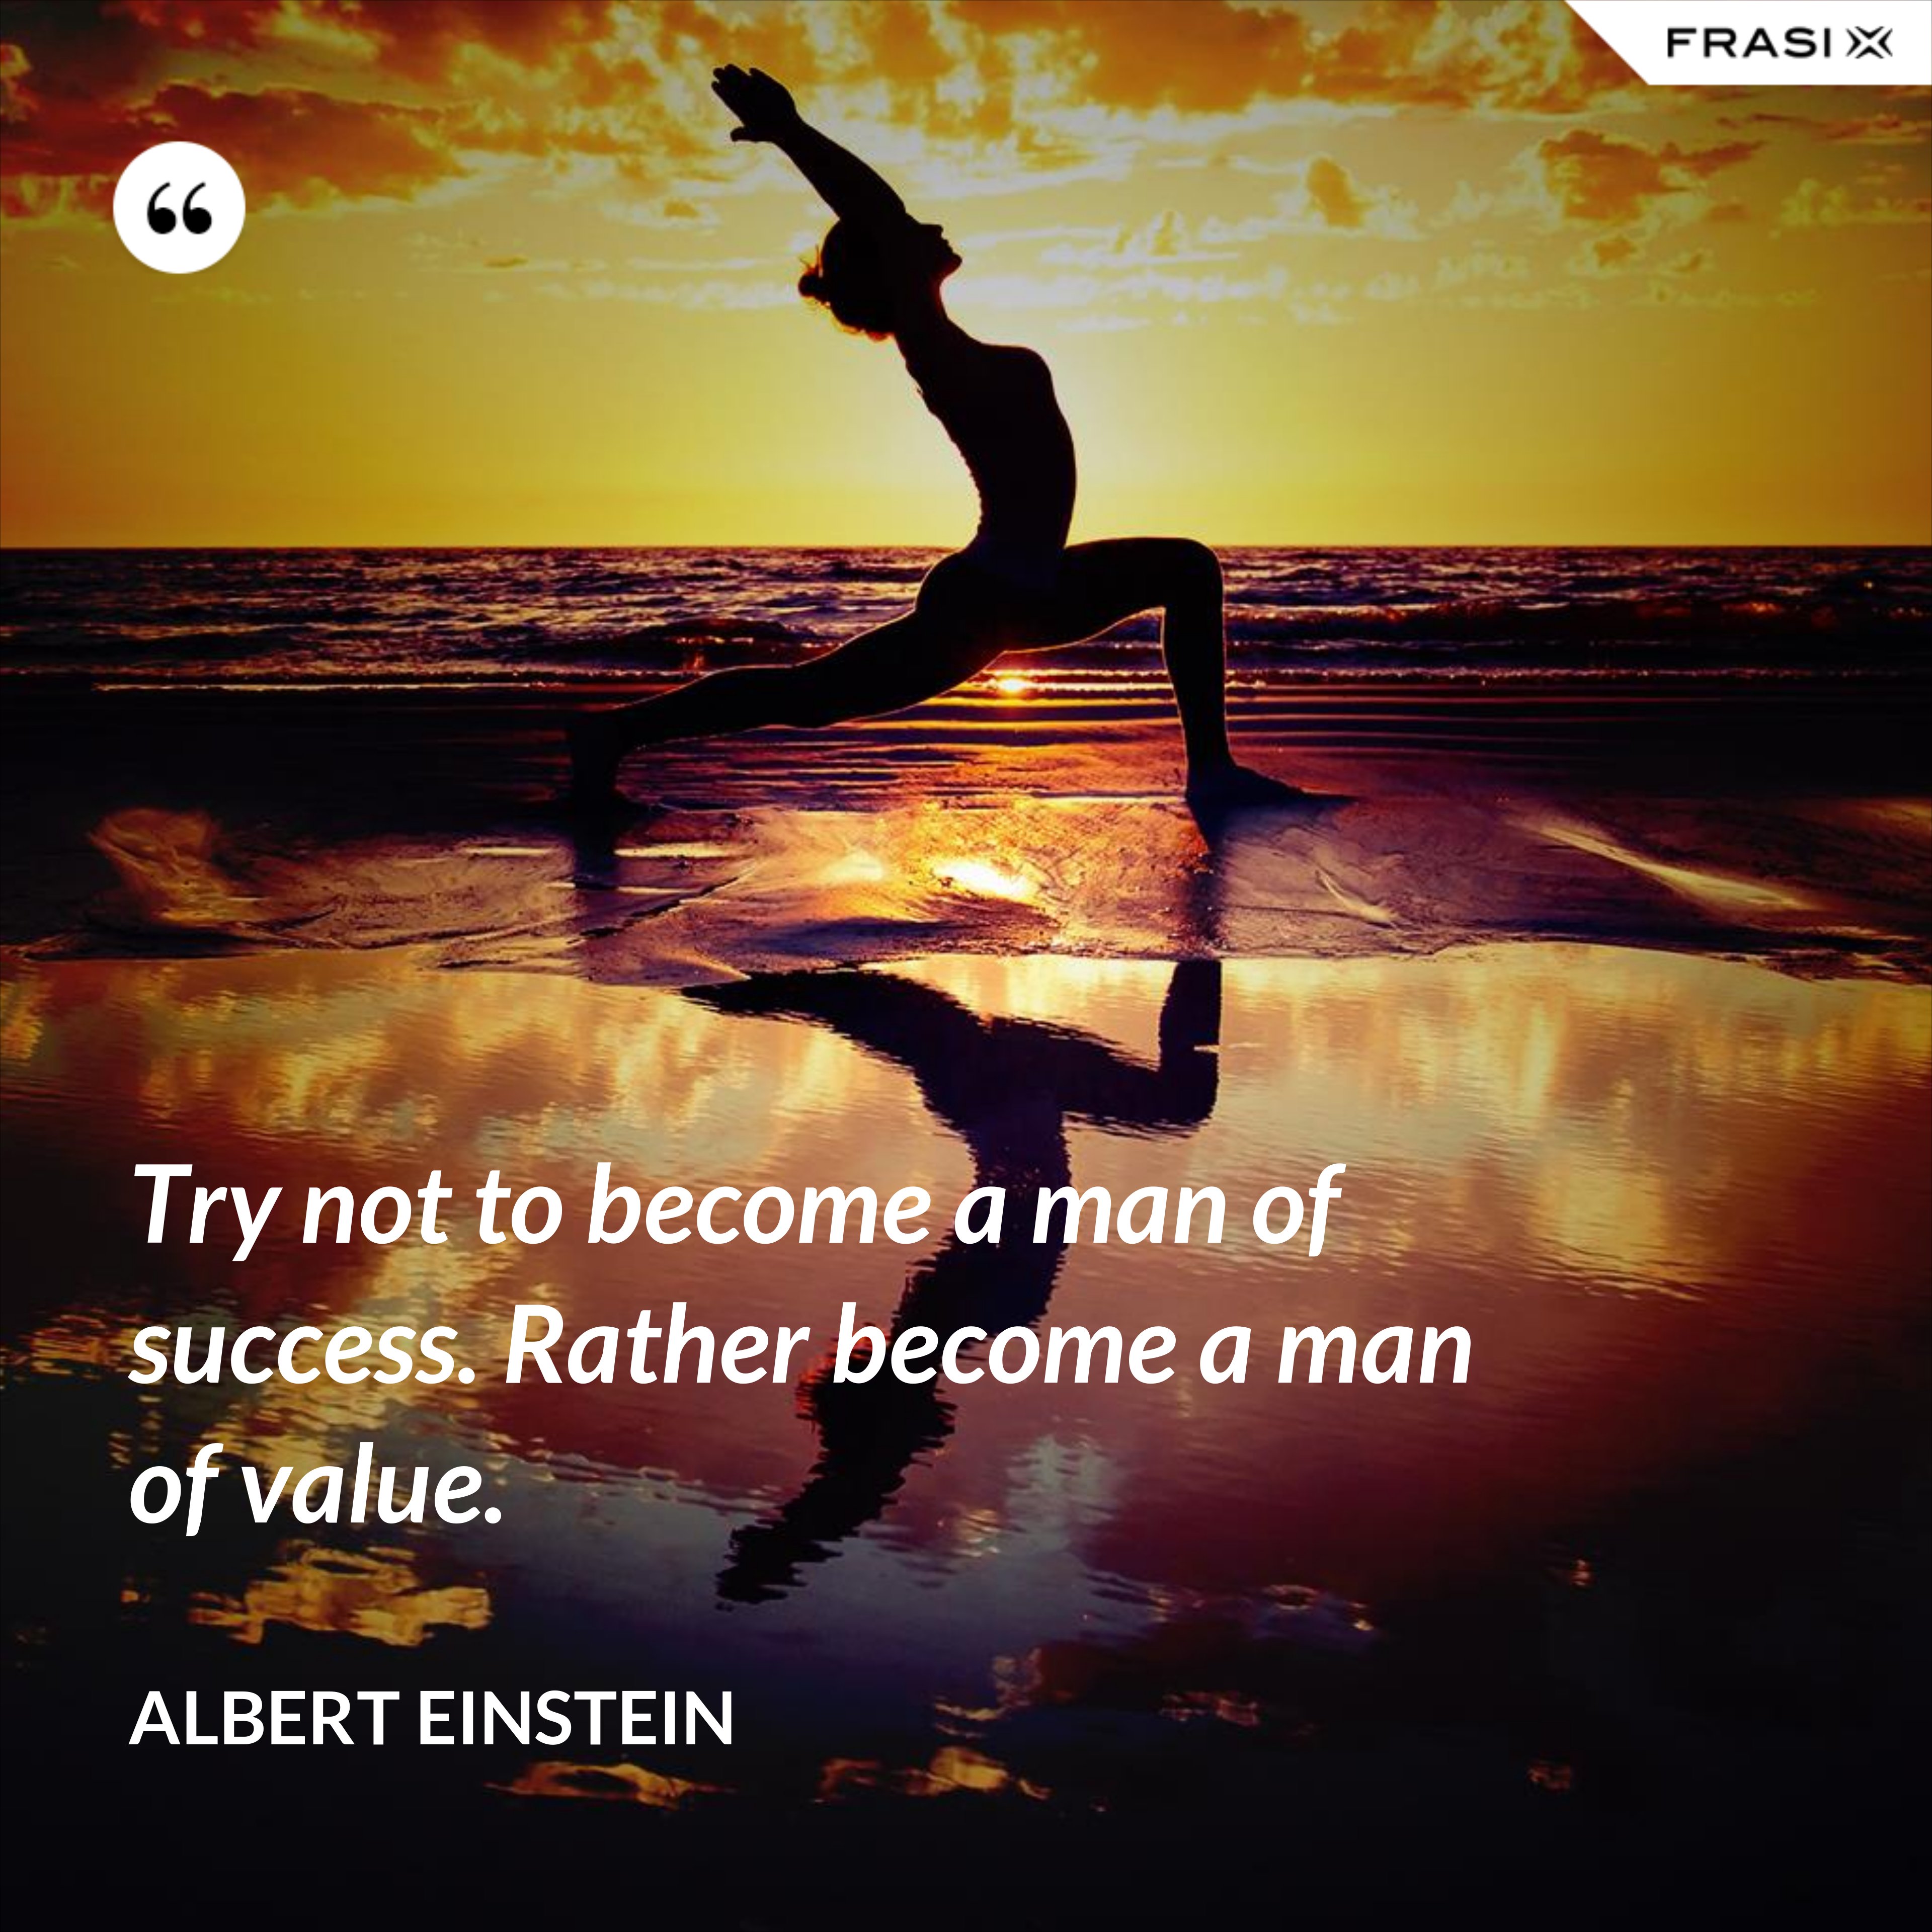 Try not to become a man of success. Rather become a man of value. - Albert Einstein